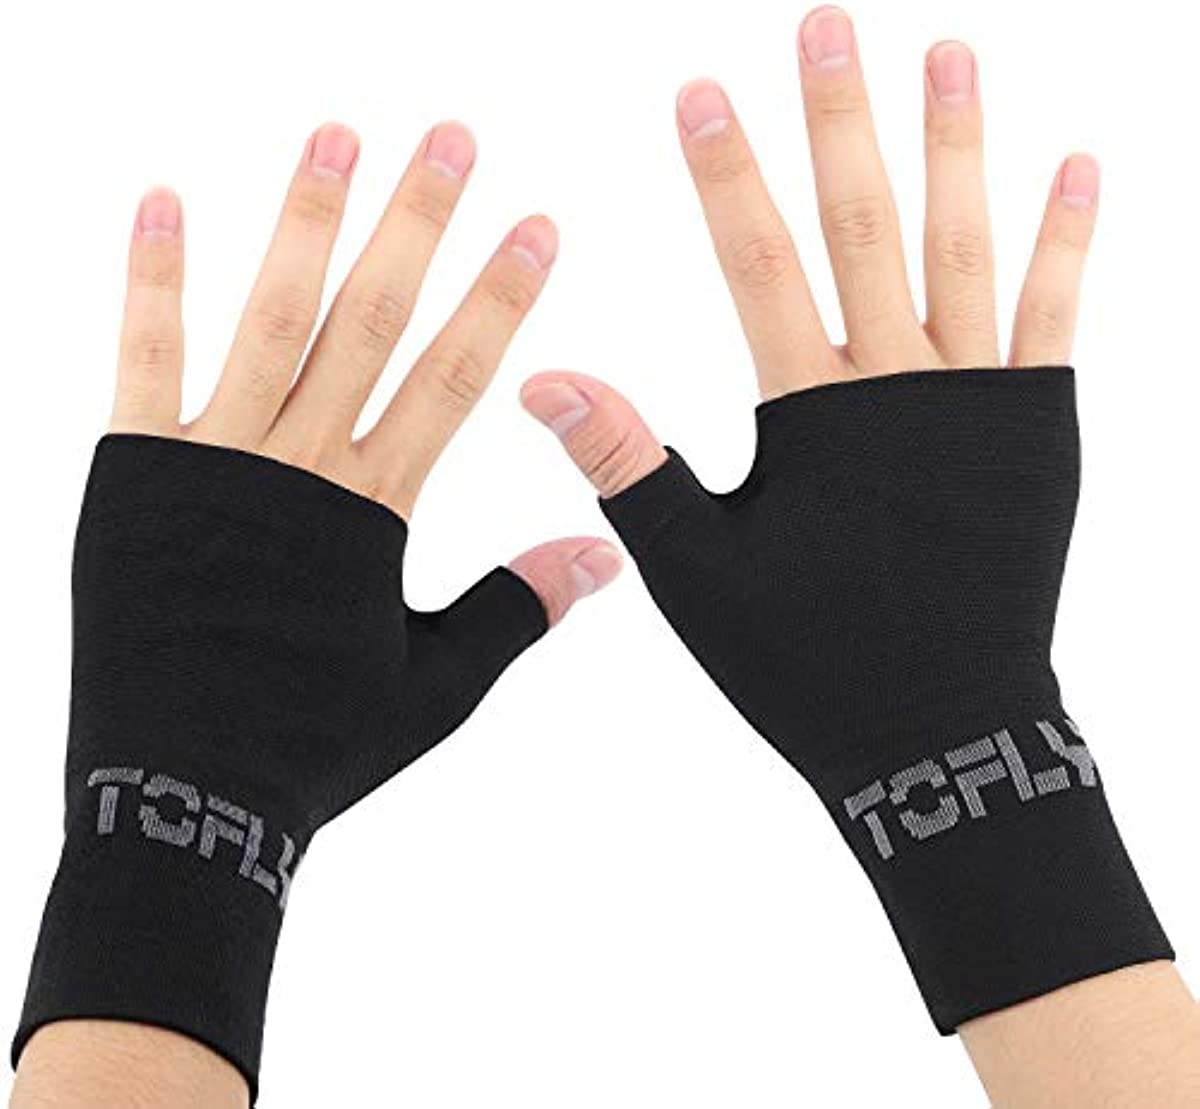 TOFLY® Wrist & Thumb Support Sleeve, 1 Pair Compression Arthritis Gloves for Unisex, Ideal for Carpal Tunnel, Wrist Pain & Fatigue, Sprains, RSI, Tendonitis, Hand Instability, Sports, Typing, Black S